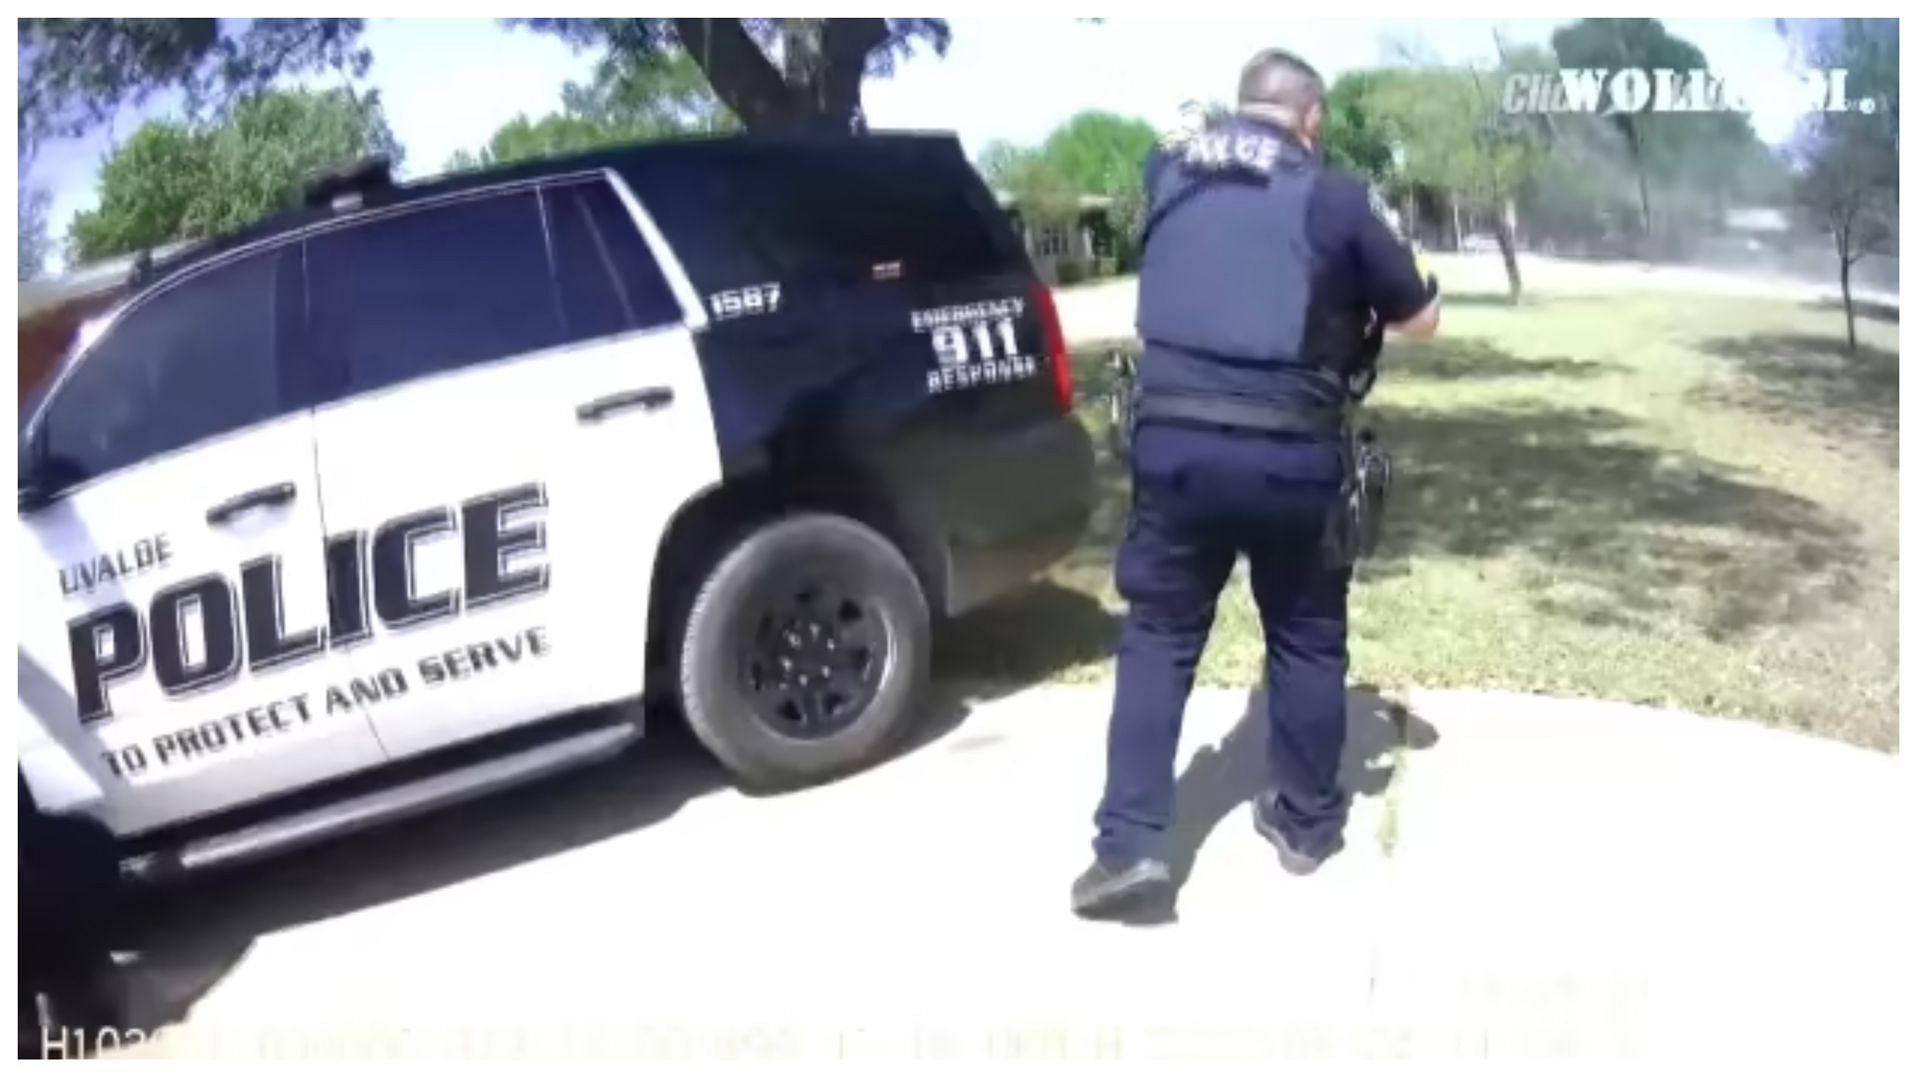 Body camera footage from Uvalde provides more information about what happened after police arrived (image via Officer Hill body cam/Uvalde Police Department)